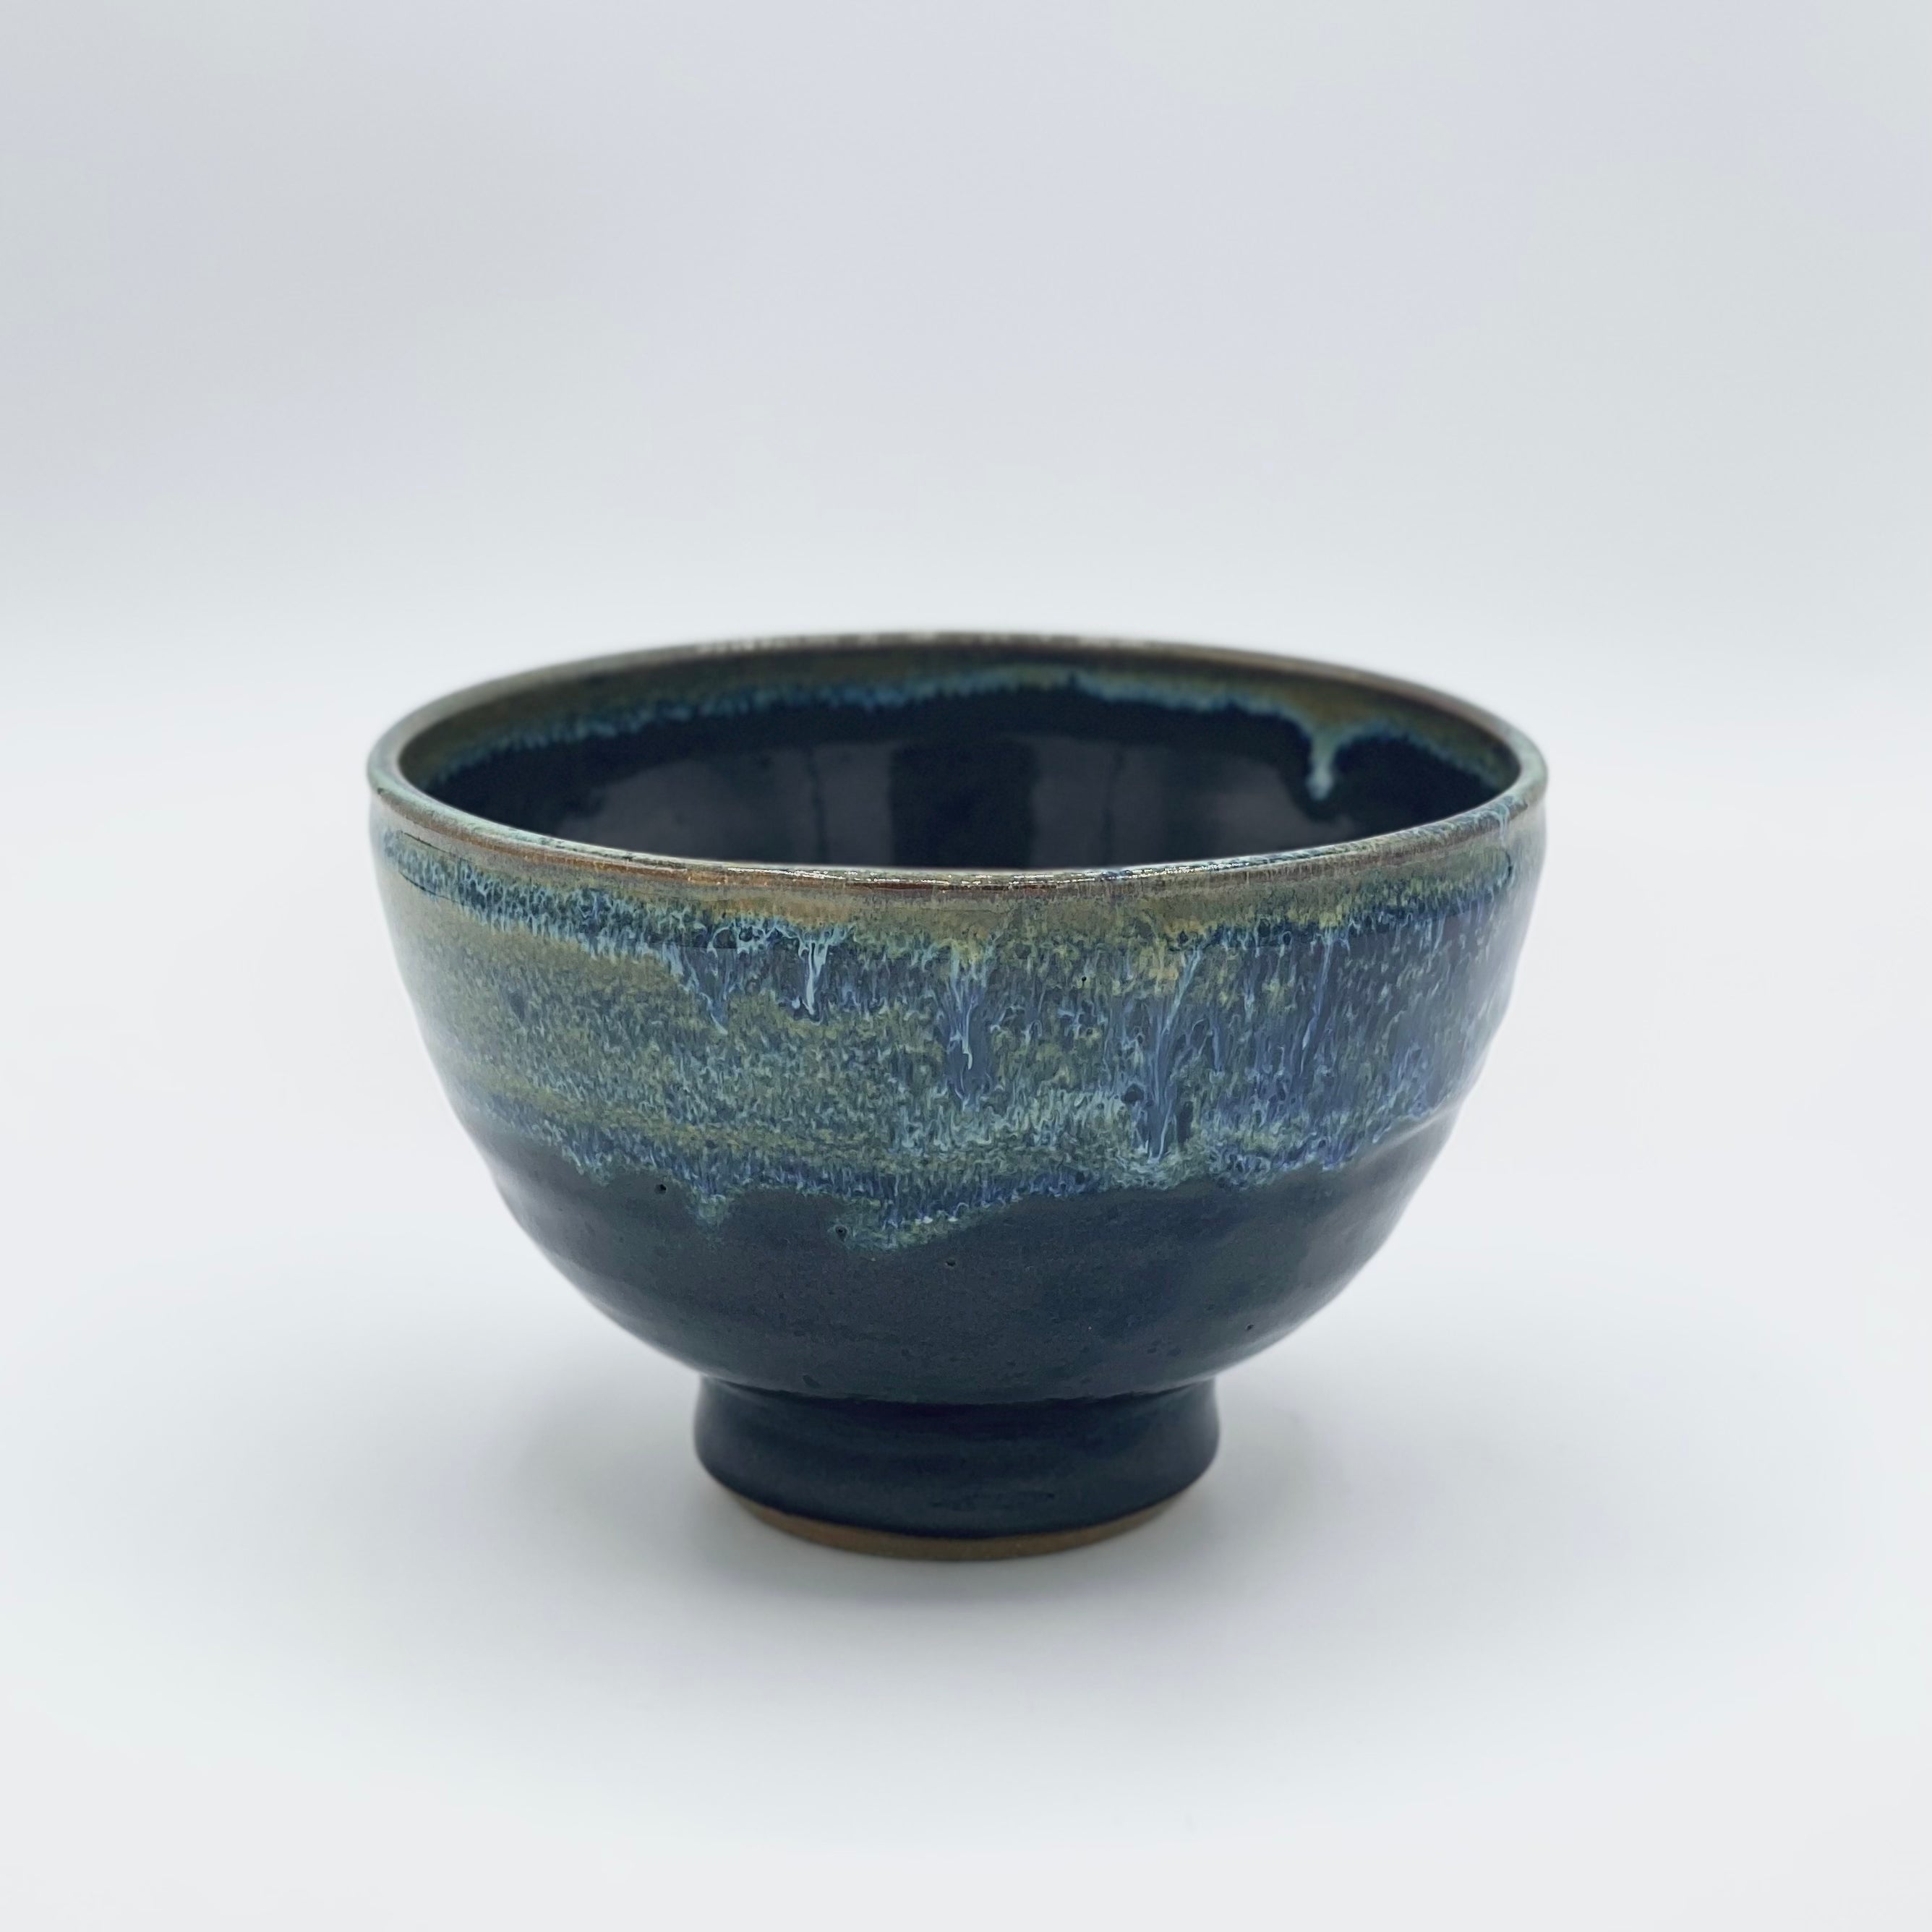 Bowl by Christopher Doiron